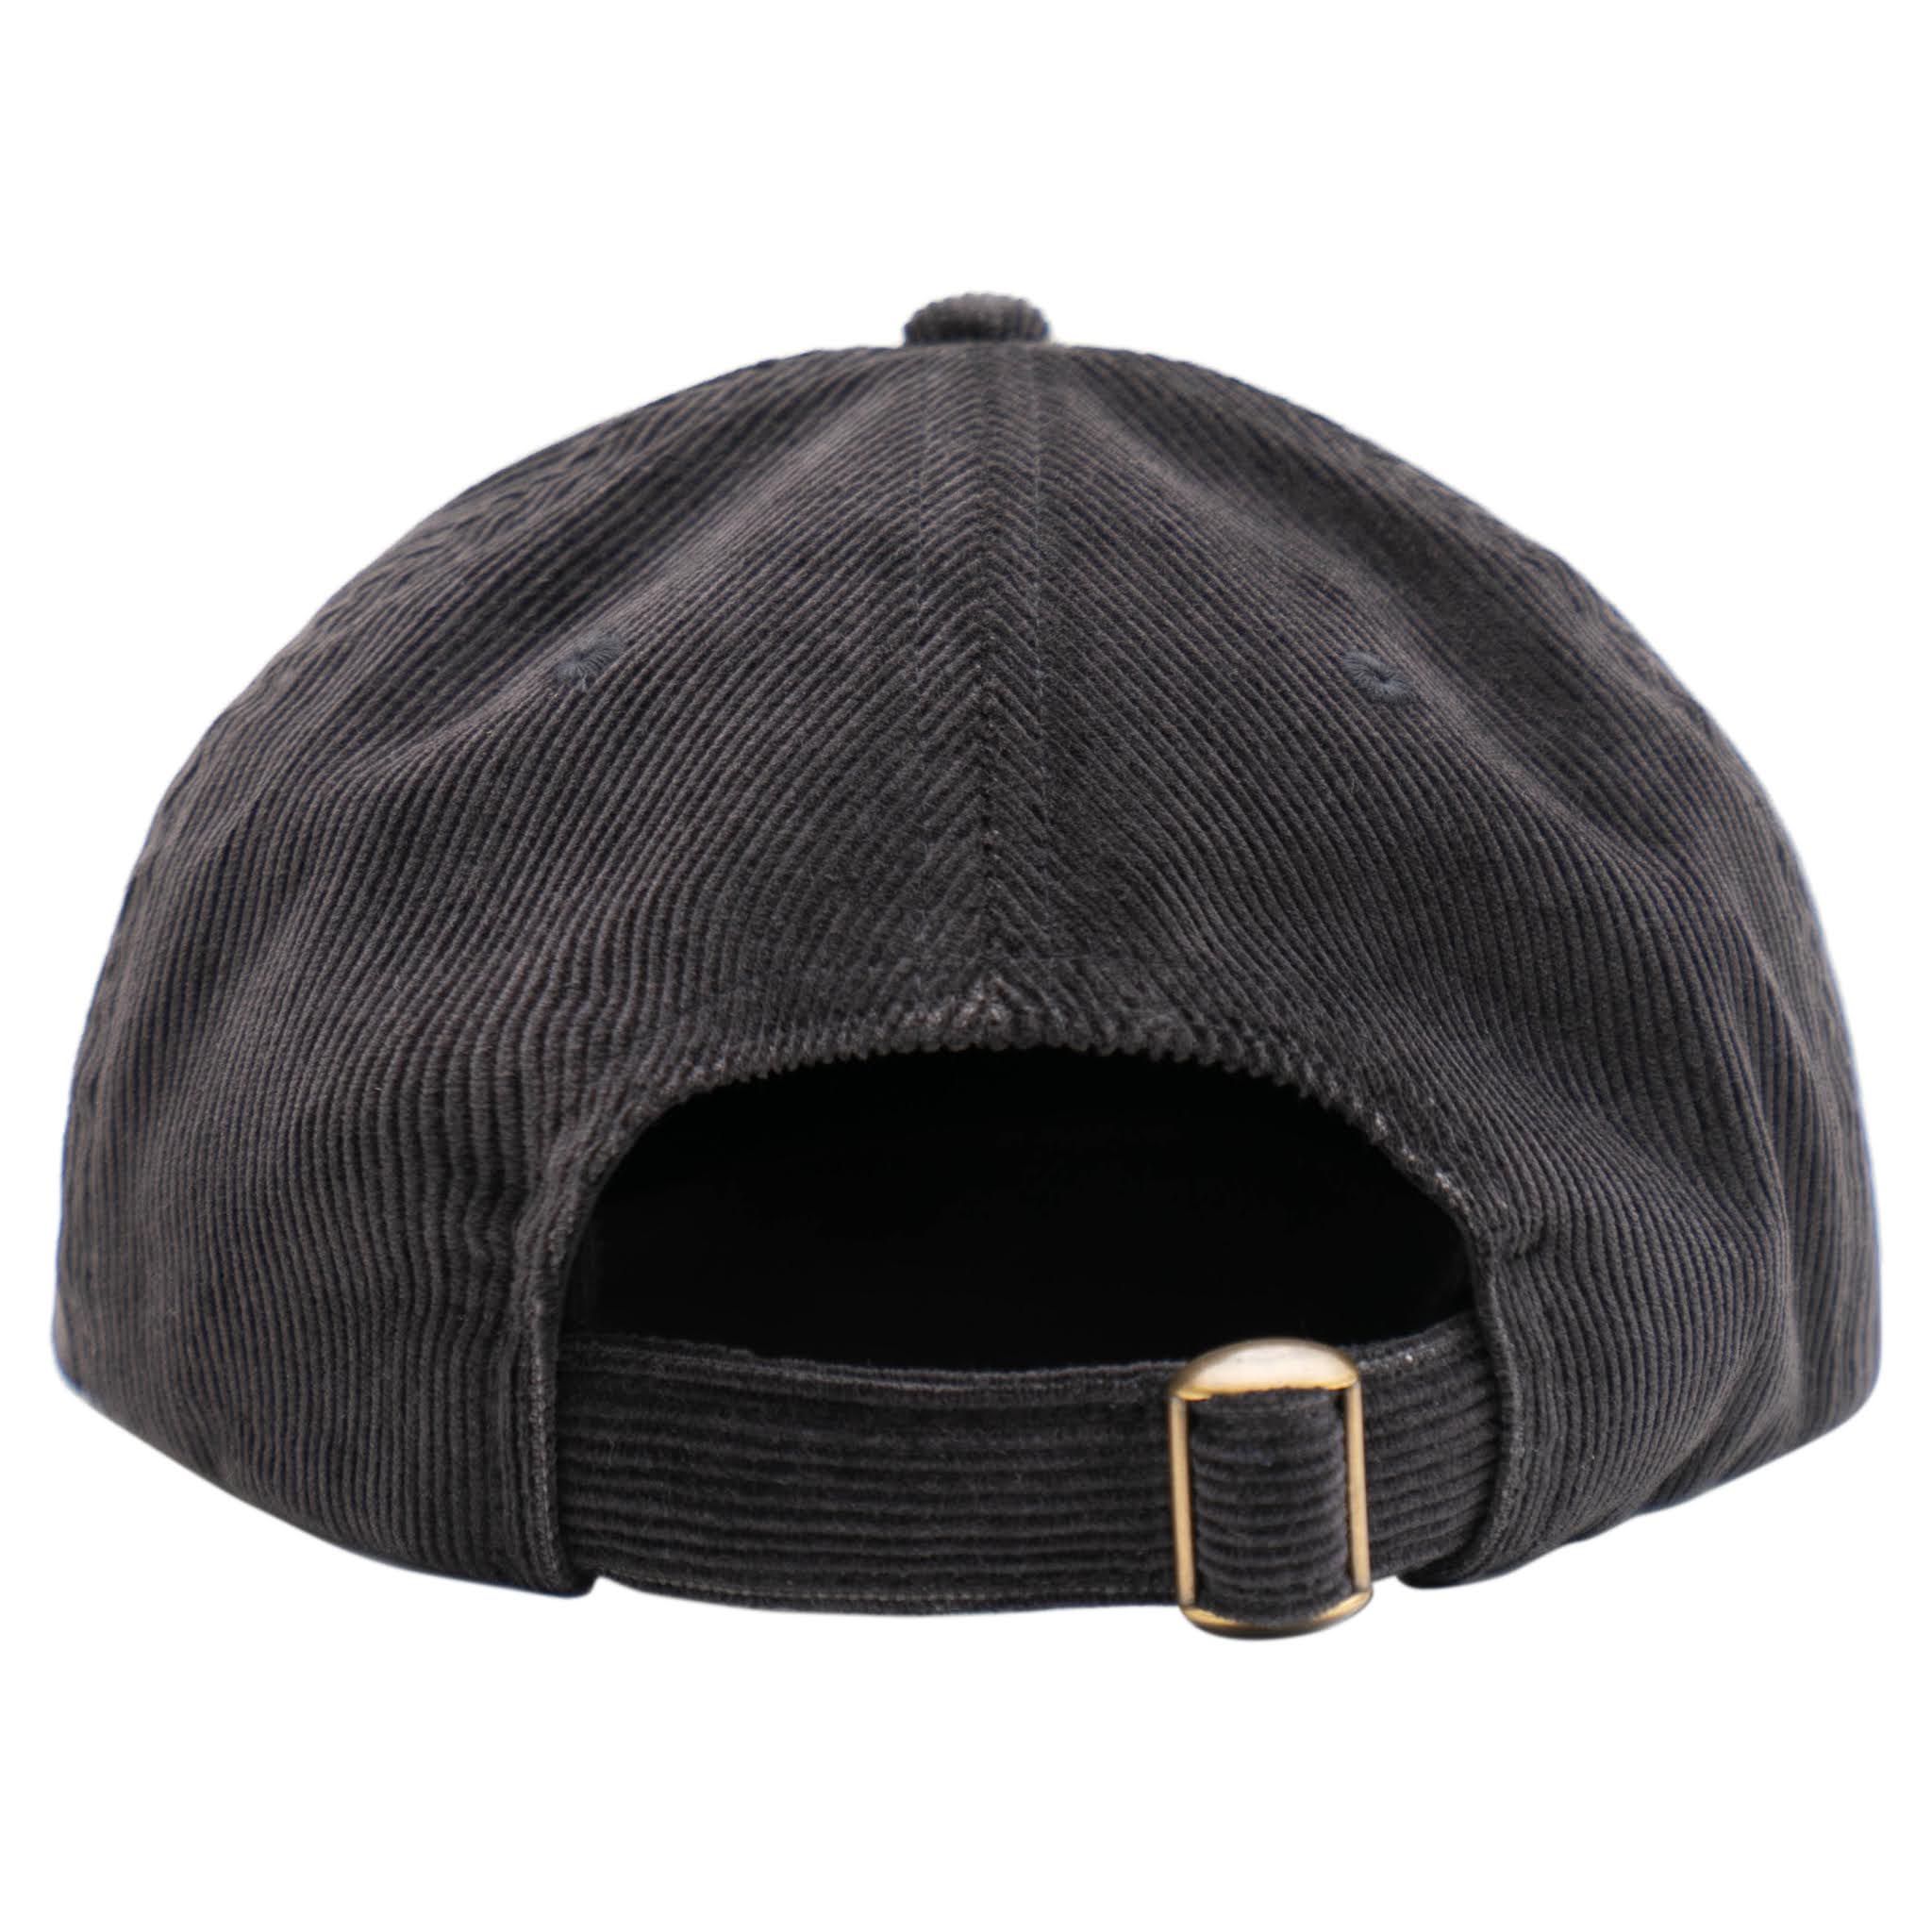 CUP AND CONE: Corduroy 6 Panel